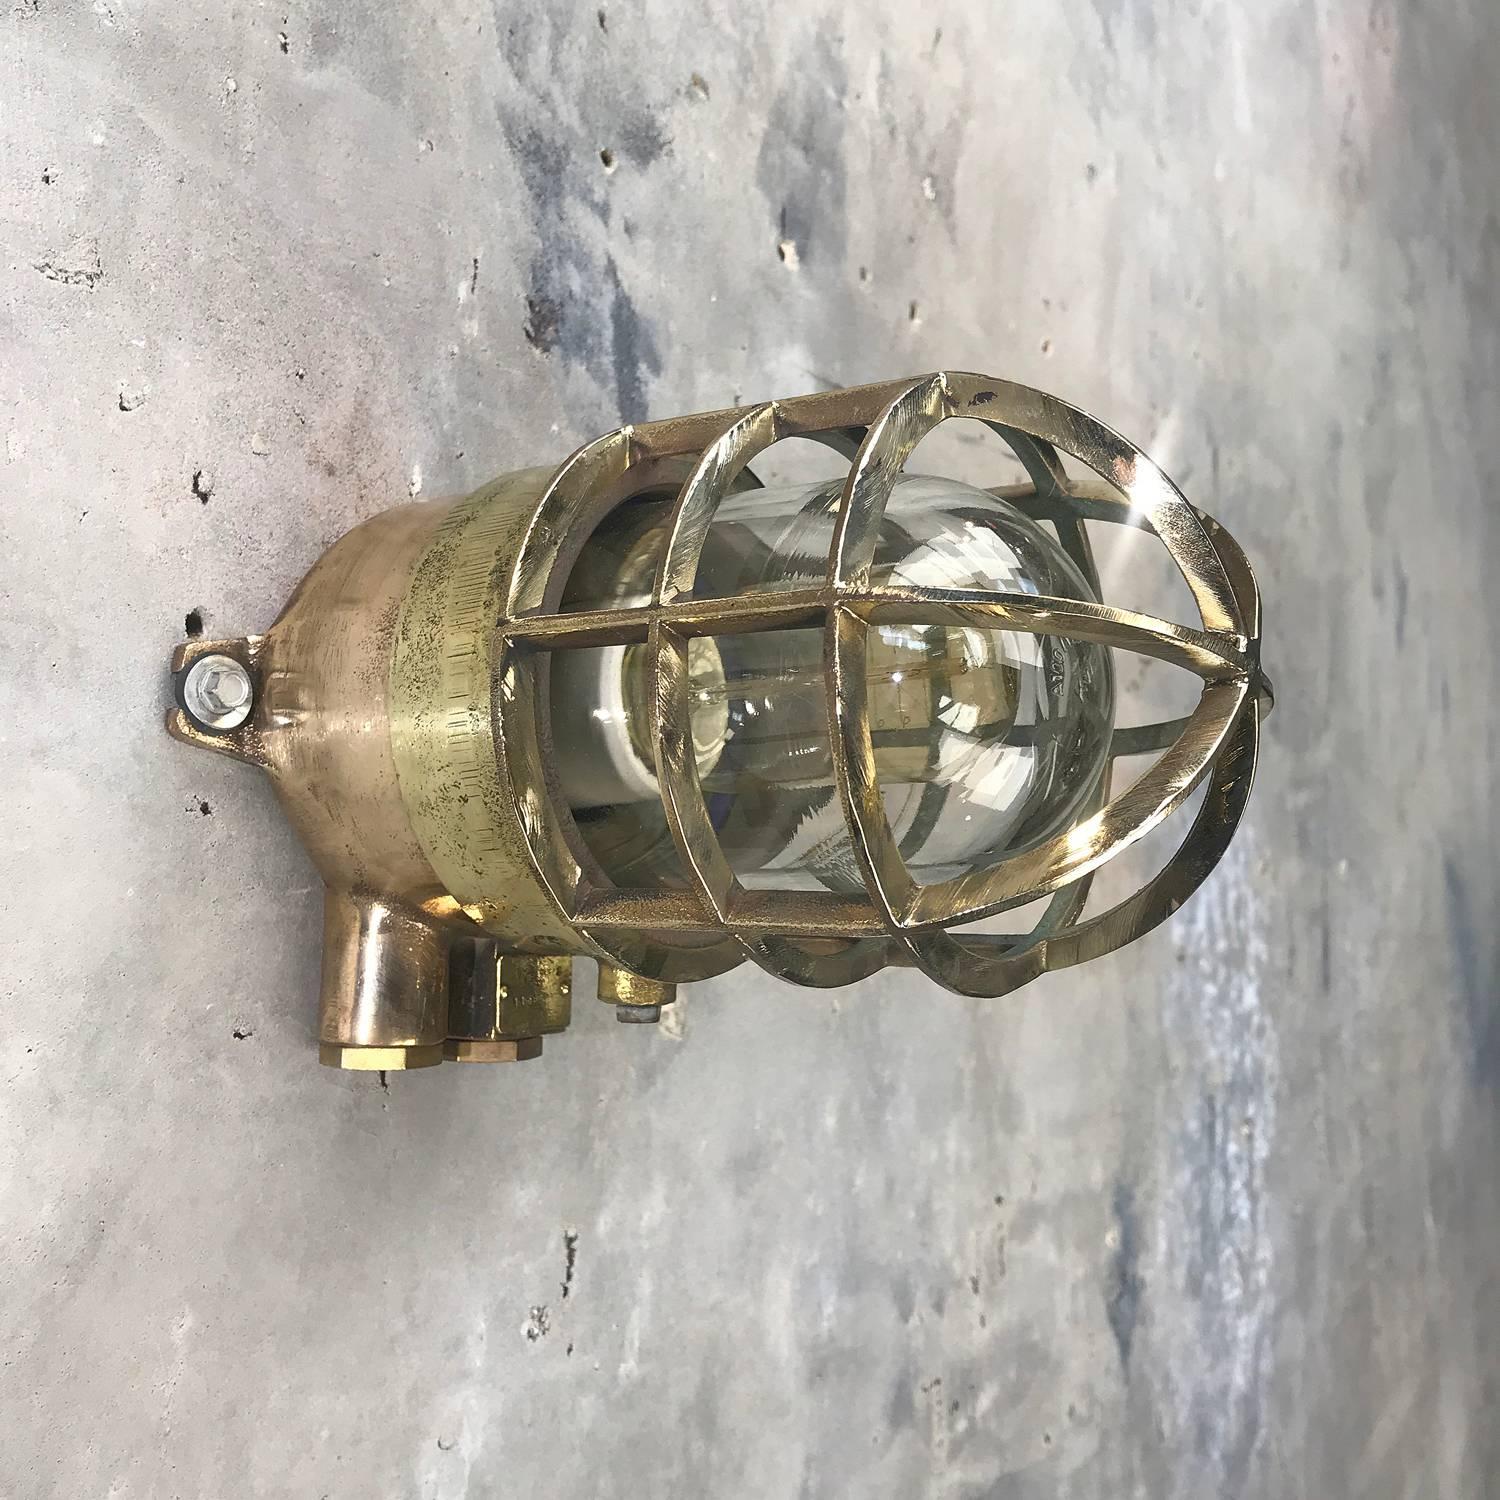 Late 20th Century 1970s German Explosion Proof Wall Light Cast Bronze, Brass, Glass Shade & Cage For Sale